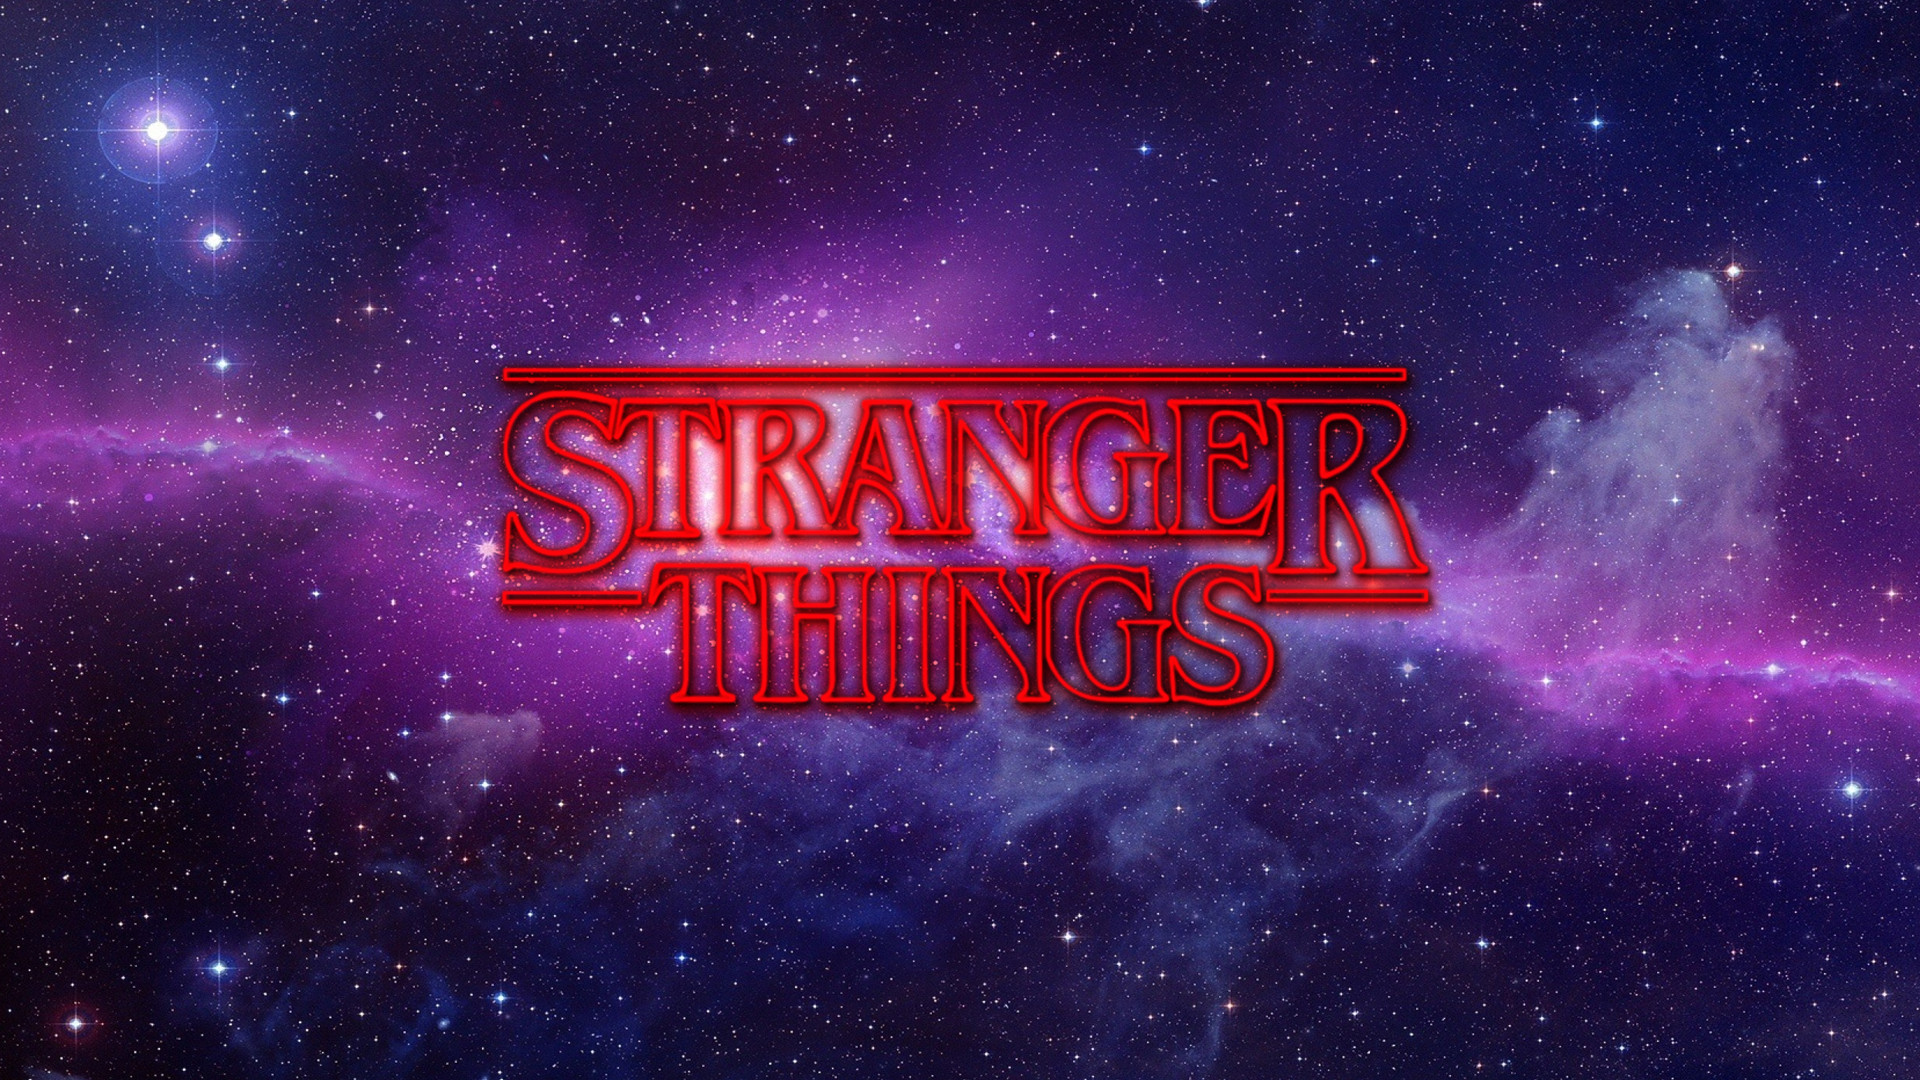 wallpaper stranger things,text,sky,font,purple,space